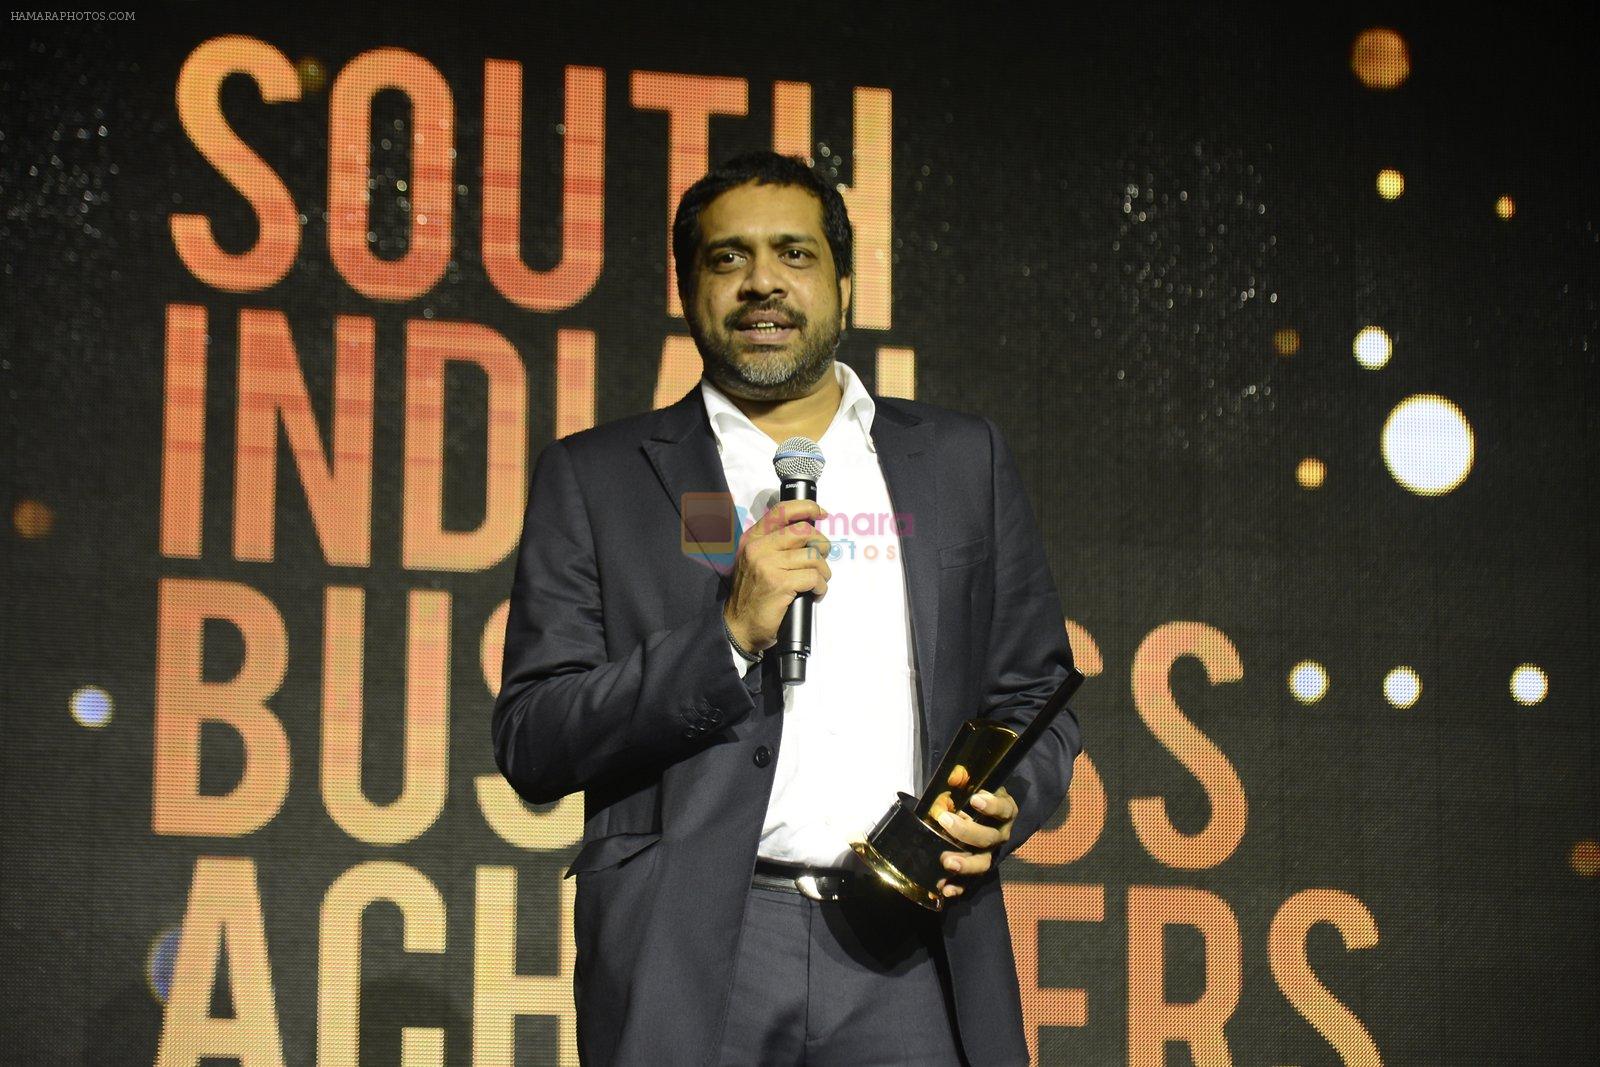 at SIIMA's South Indian Business Achievers awards in Singapore on 29th June 2016